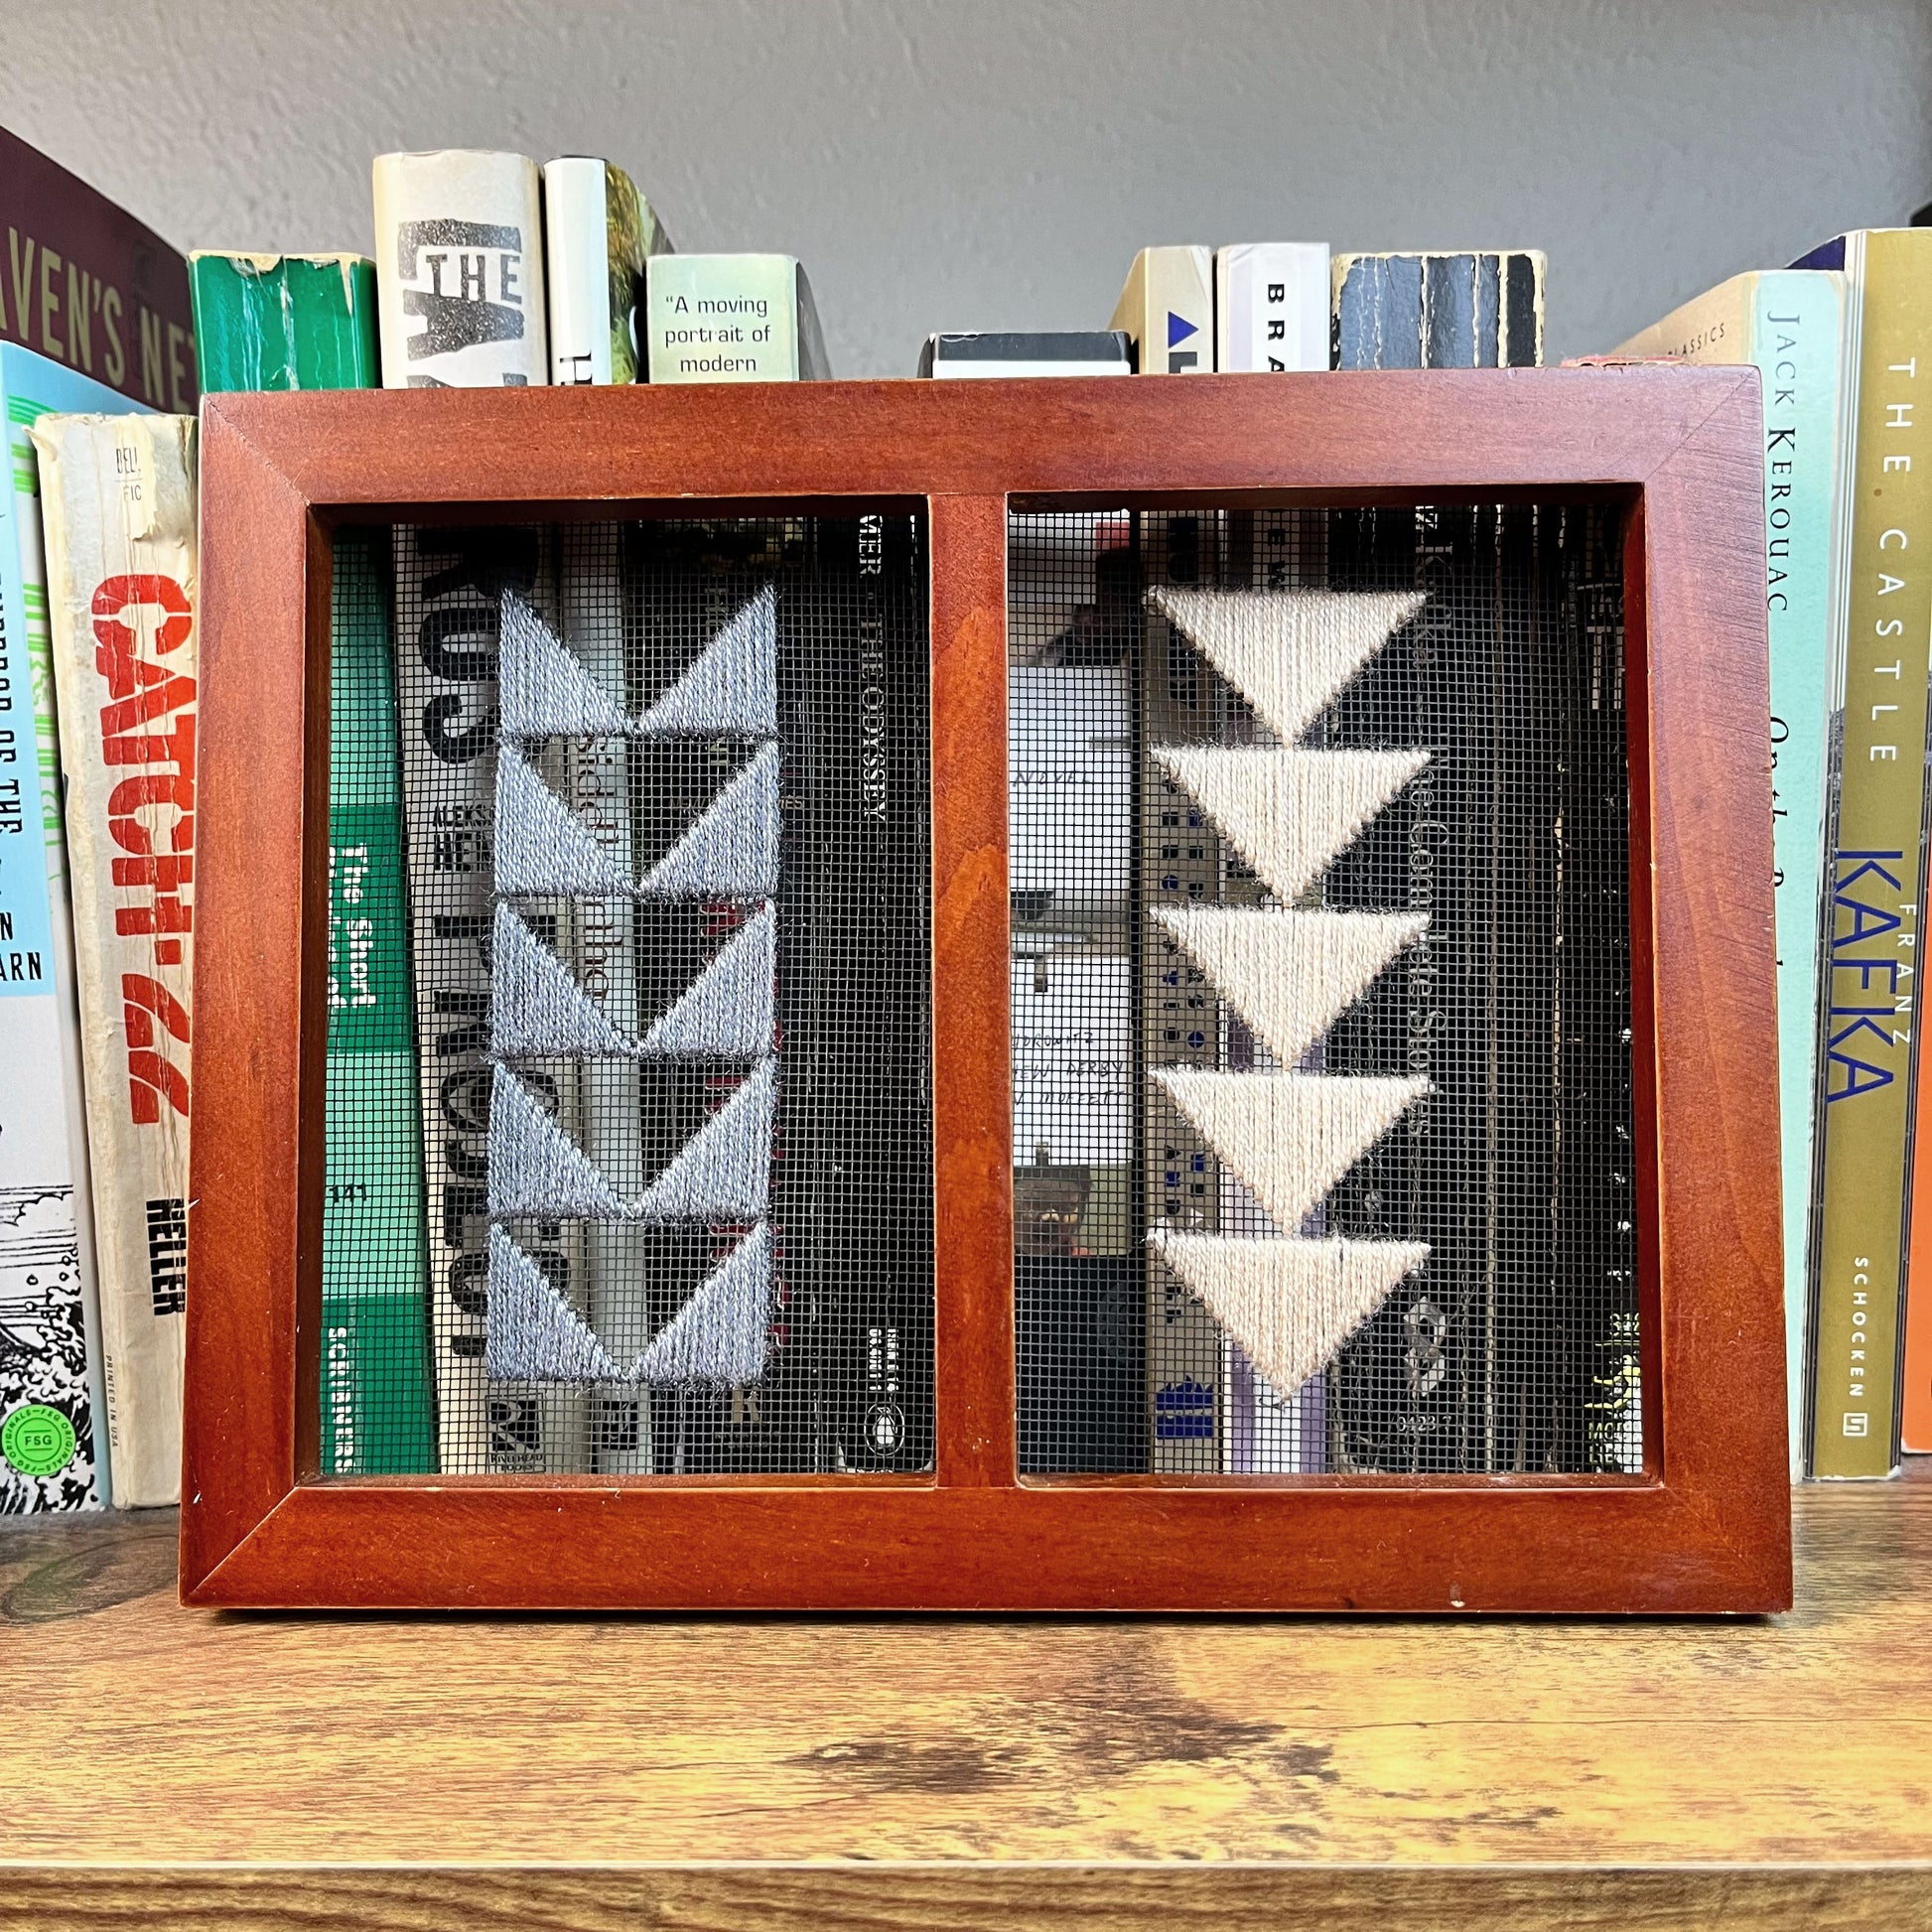 a piece of window screen hand stitched with two rows of triangles resembling the flying geese quilt blocks, in grey and peach, in a double wood frame, in front of a row of books